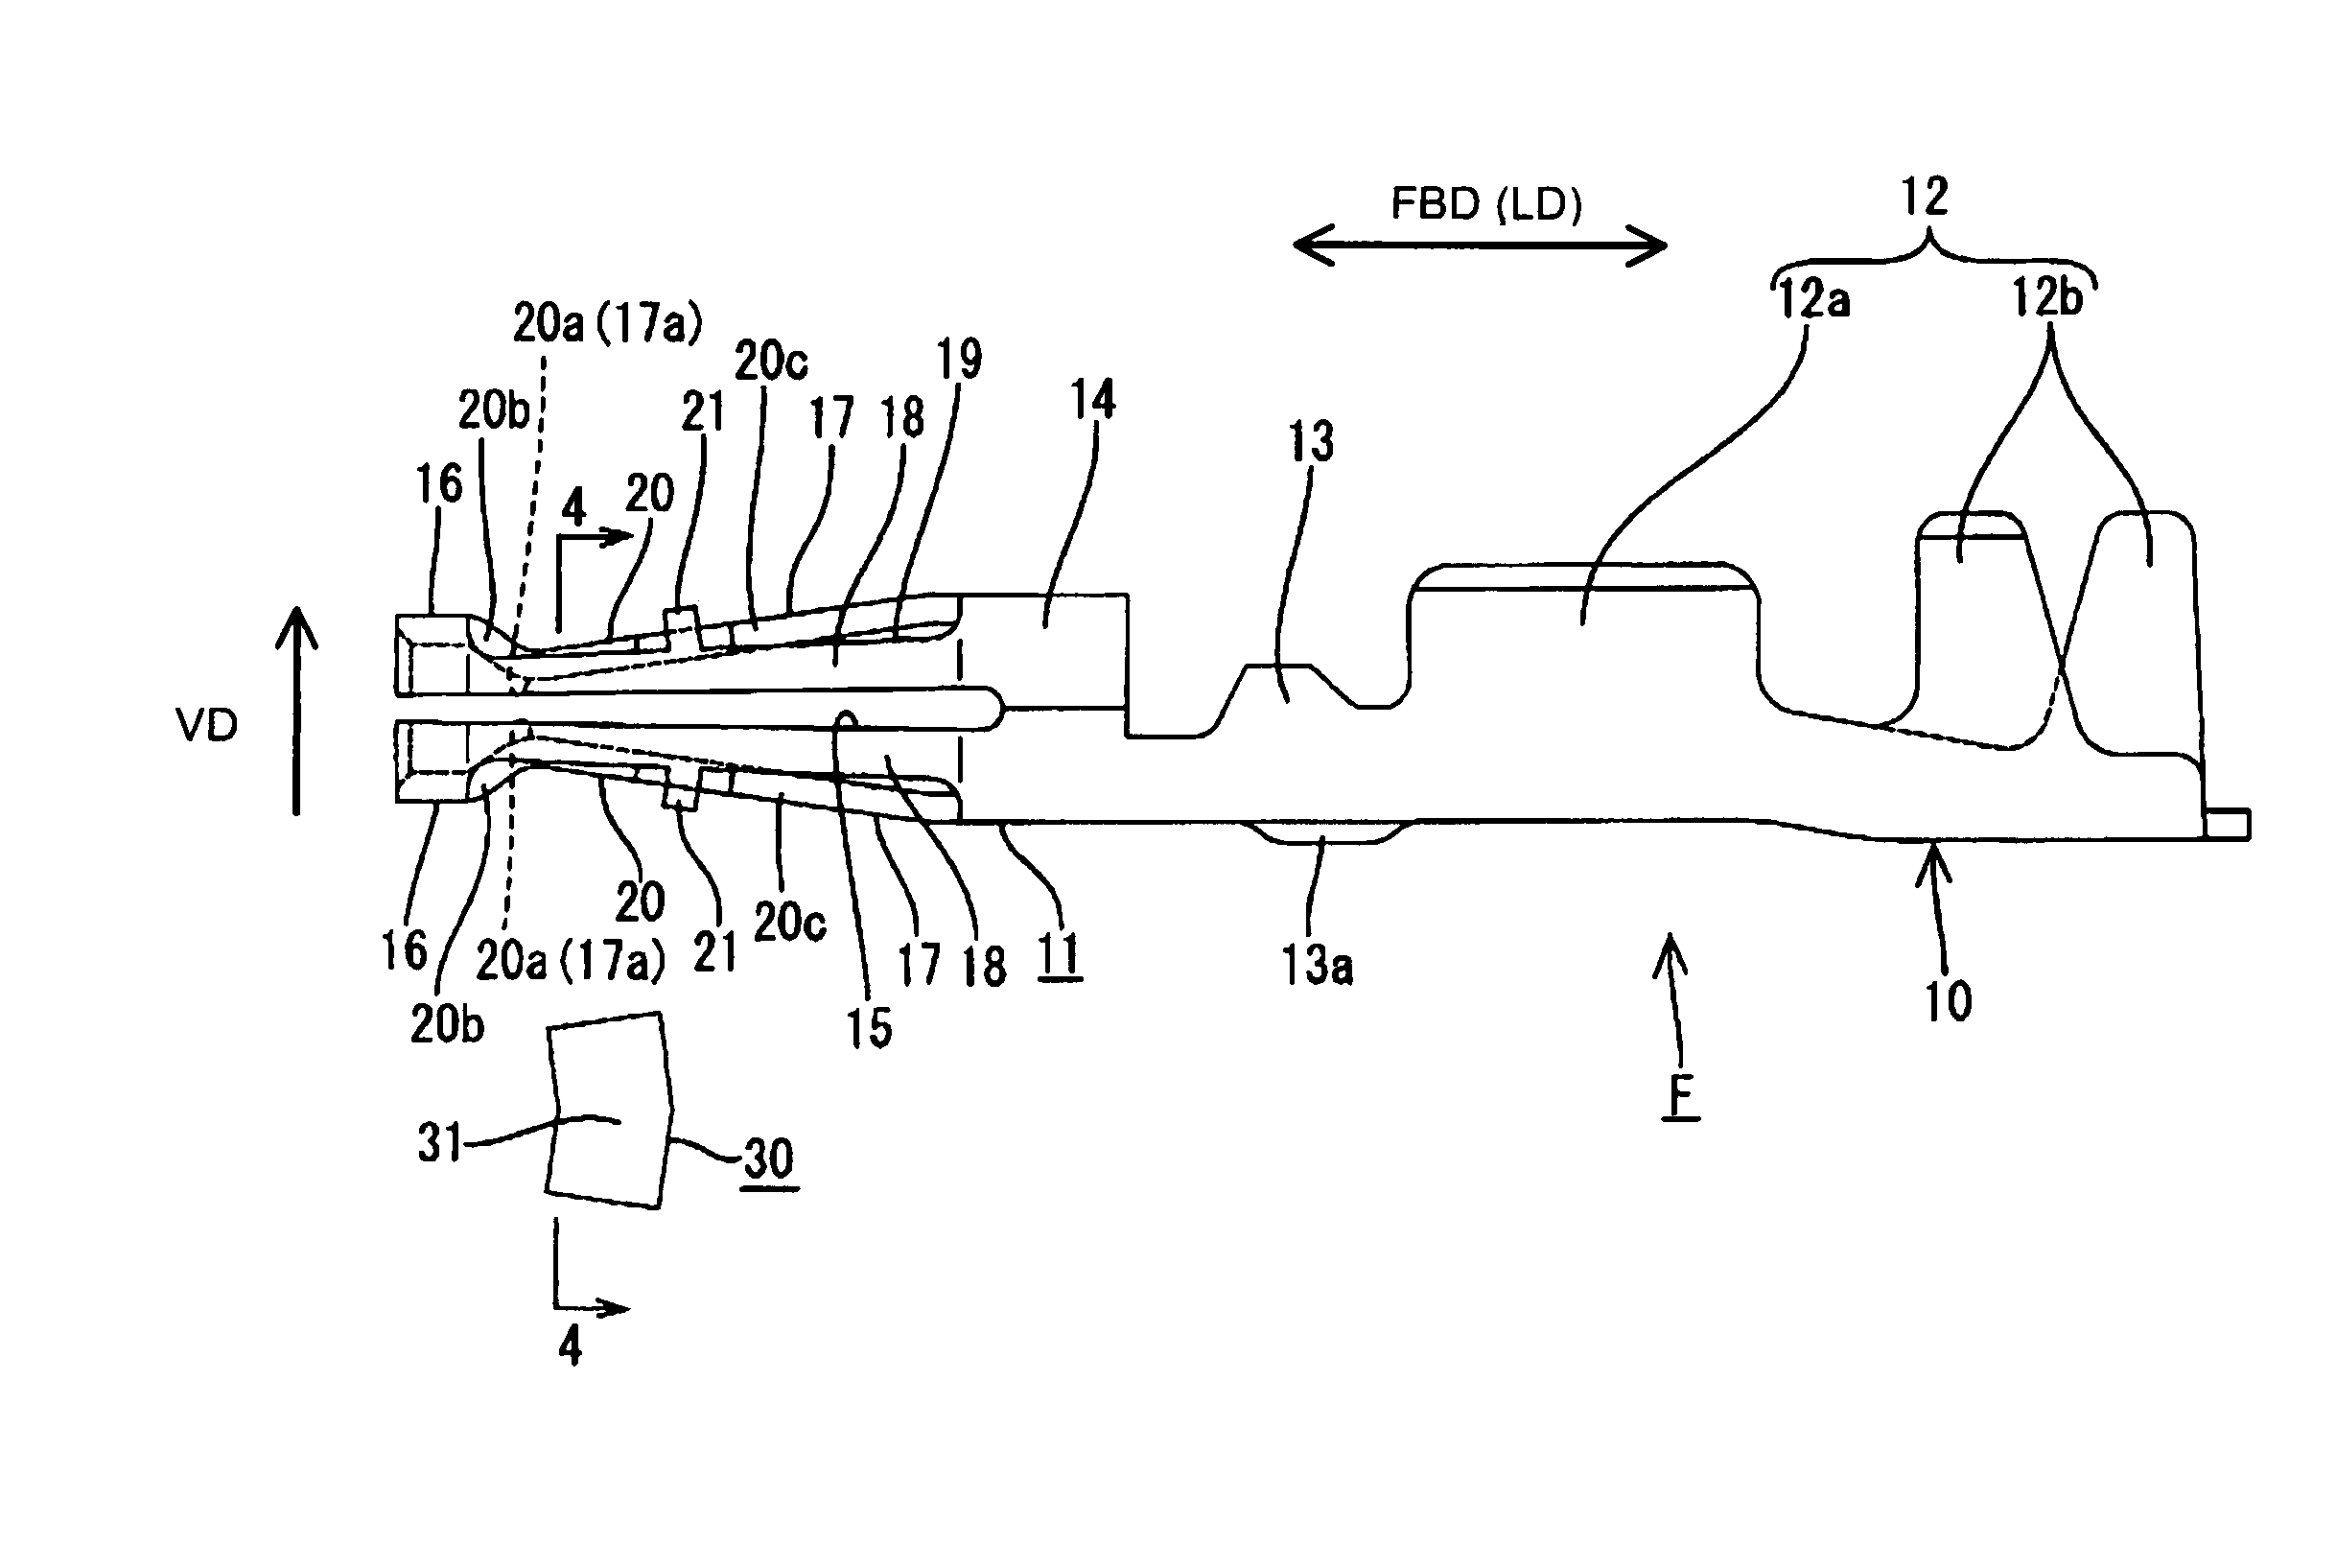 Female terminal fitting and method of assembling such terminal fitting